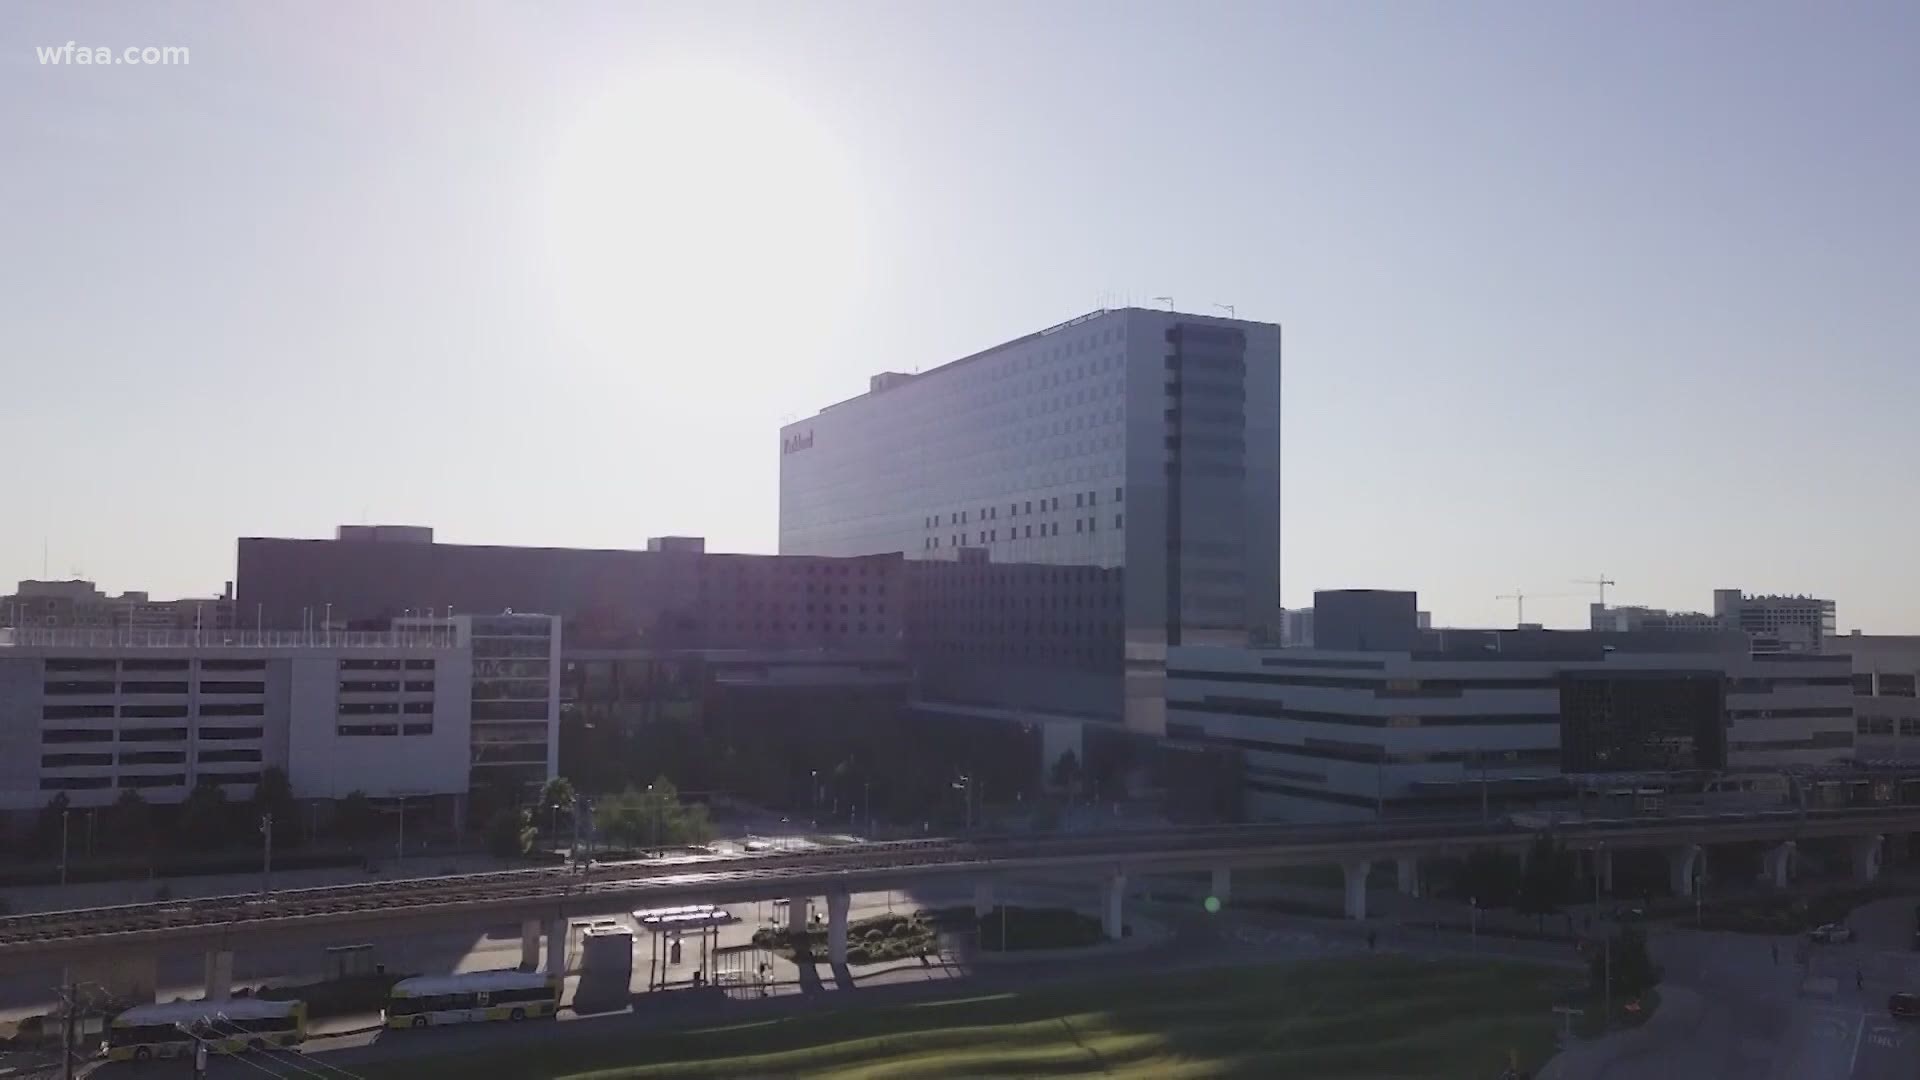 Region 'E', which includes Dallas and Tarrant counties, has the highest numbers of hospitalized COVID-19 patients in the state.